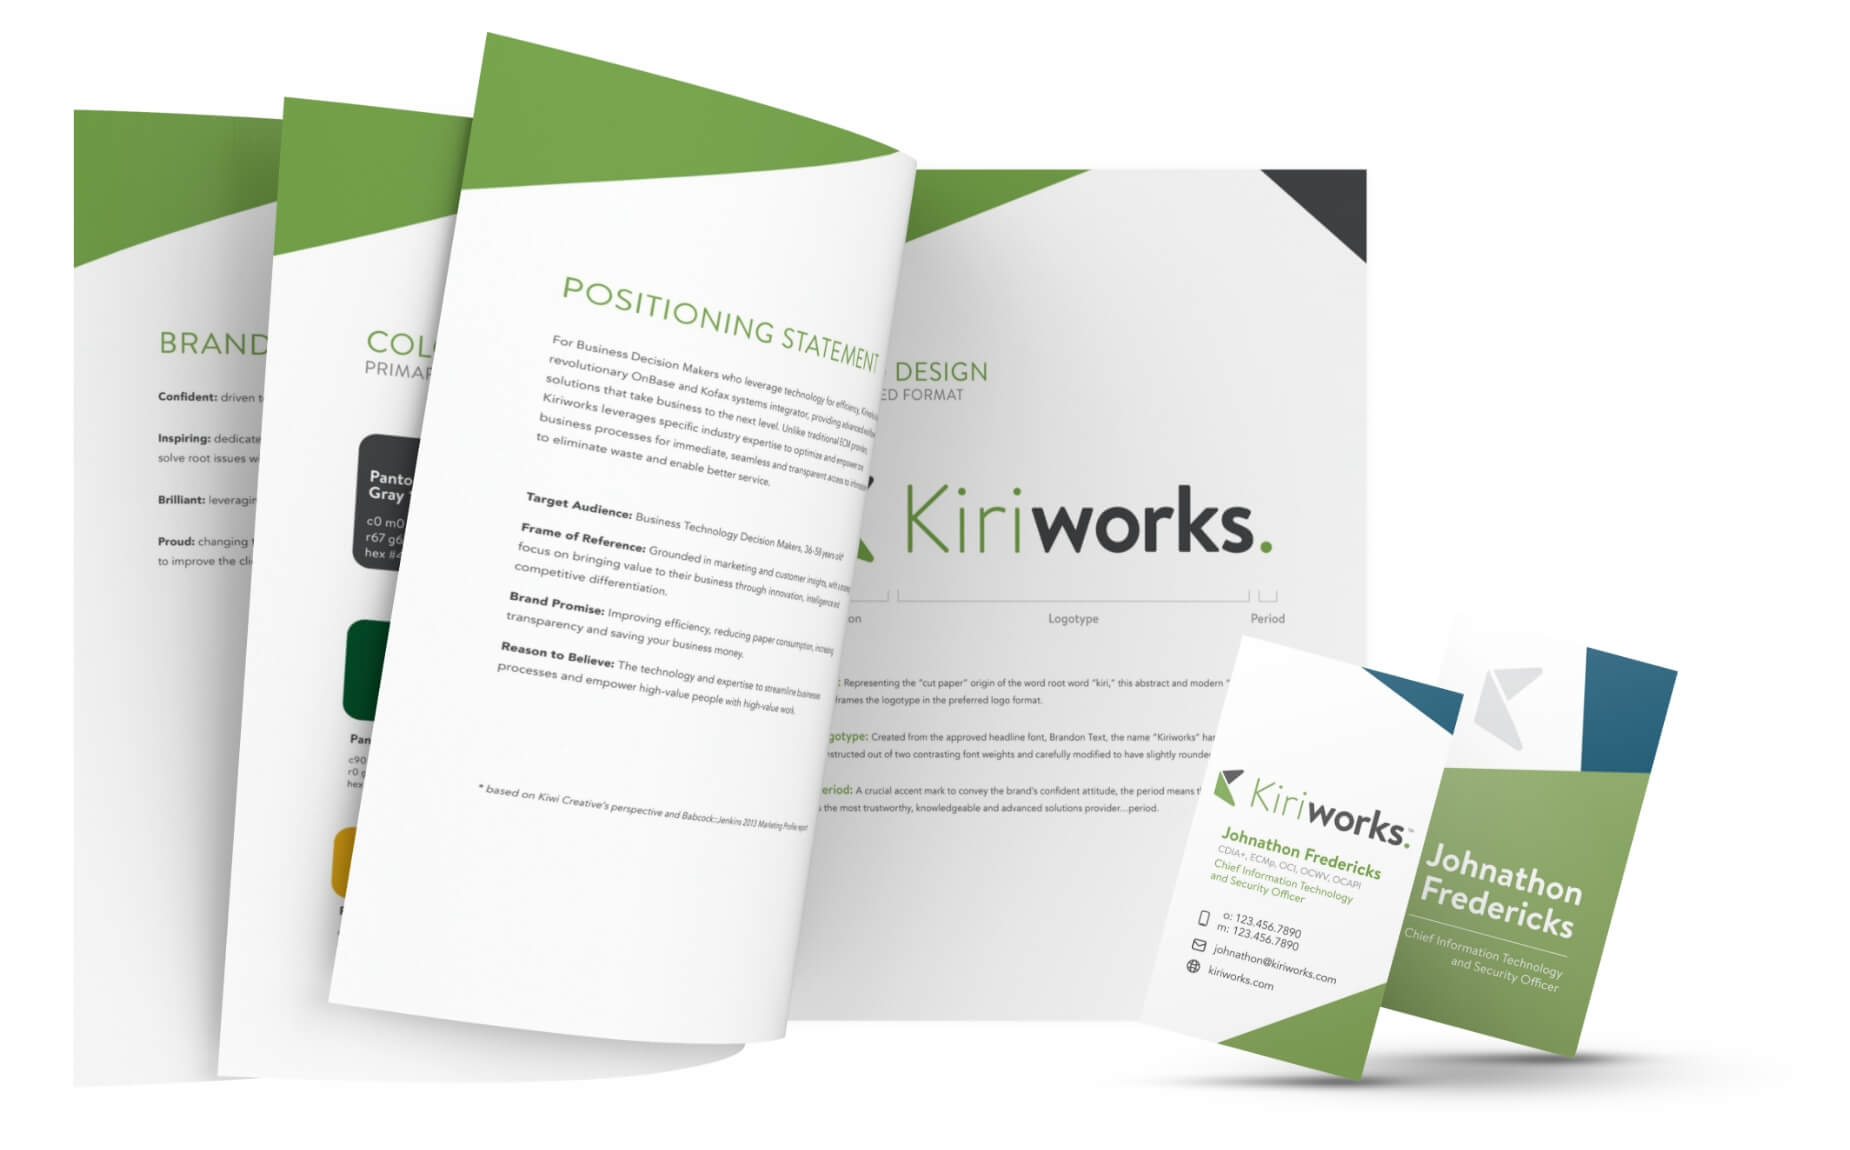 mockups of Kiriworks' brand guidelines and business cards